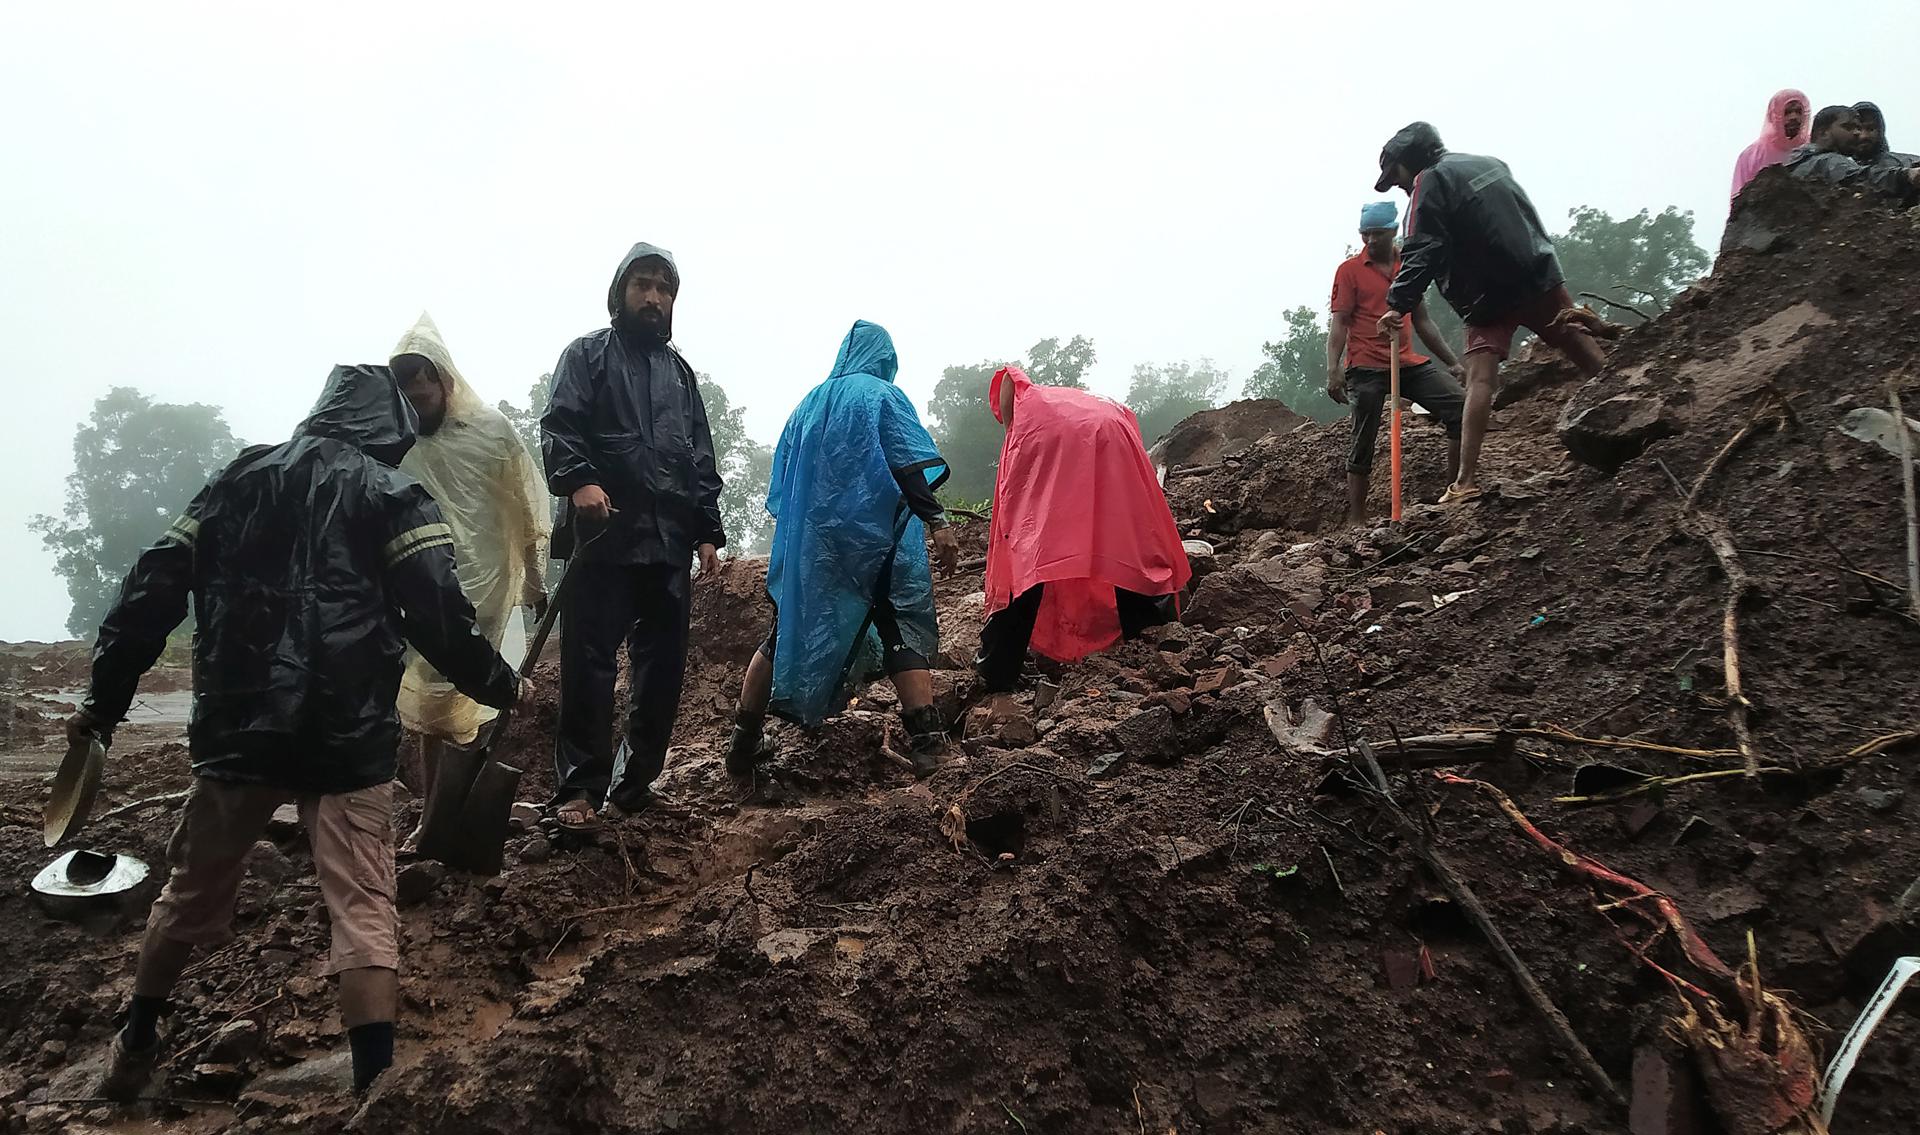 National Disaster Response Force (NDRF) personnel along with others perform a rescue operation after a landslide in Irshalwadi village in Raigad district, Maharashtra, India, 20 July 2023. EFE-EPA/DIVYAKANT SOLANKI